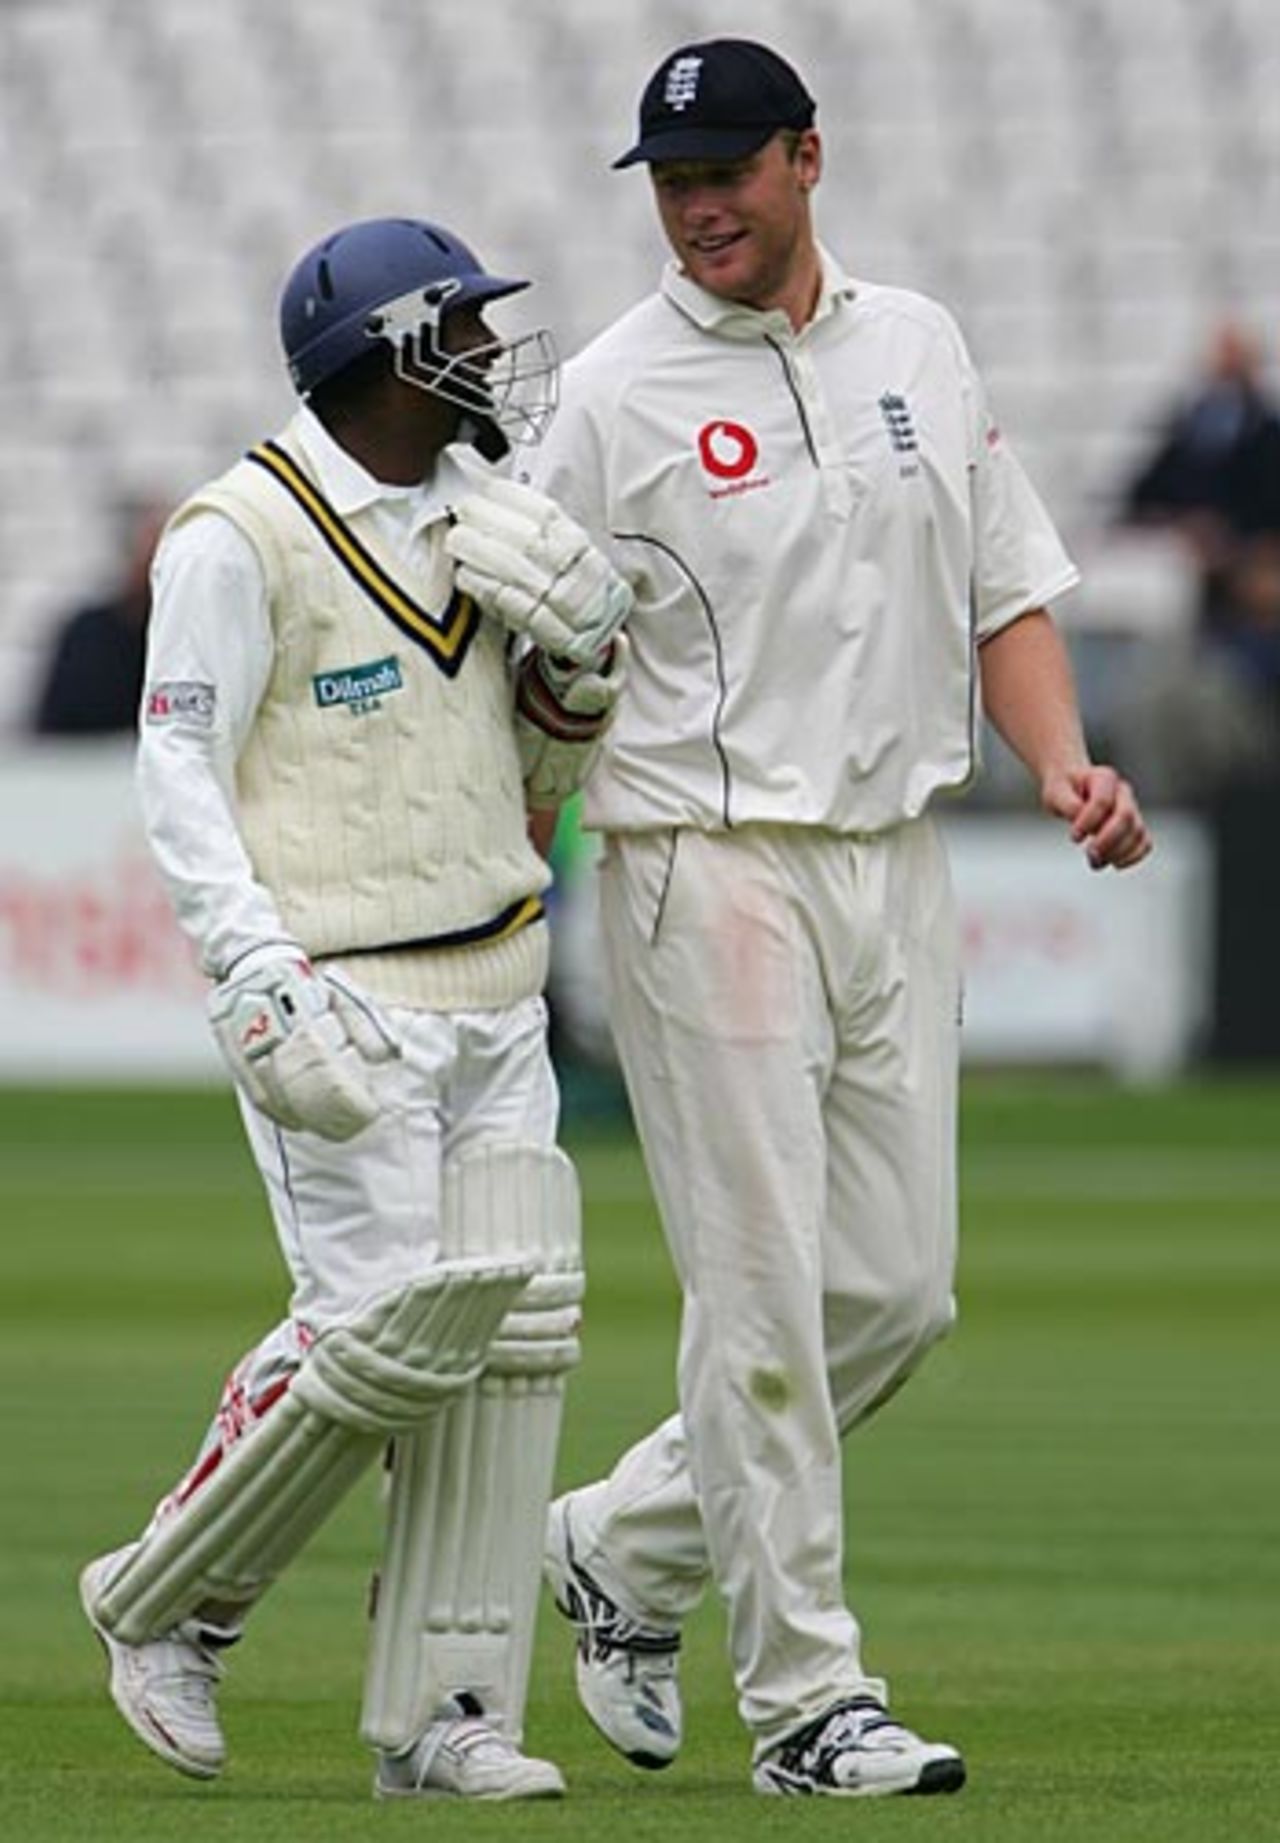 Andrew Flintoff and Muttiah Muralitharan chat after bad light forced players off, England v Sri Lanka, 1st Test, Lord's, May 15, 2006